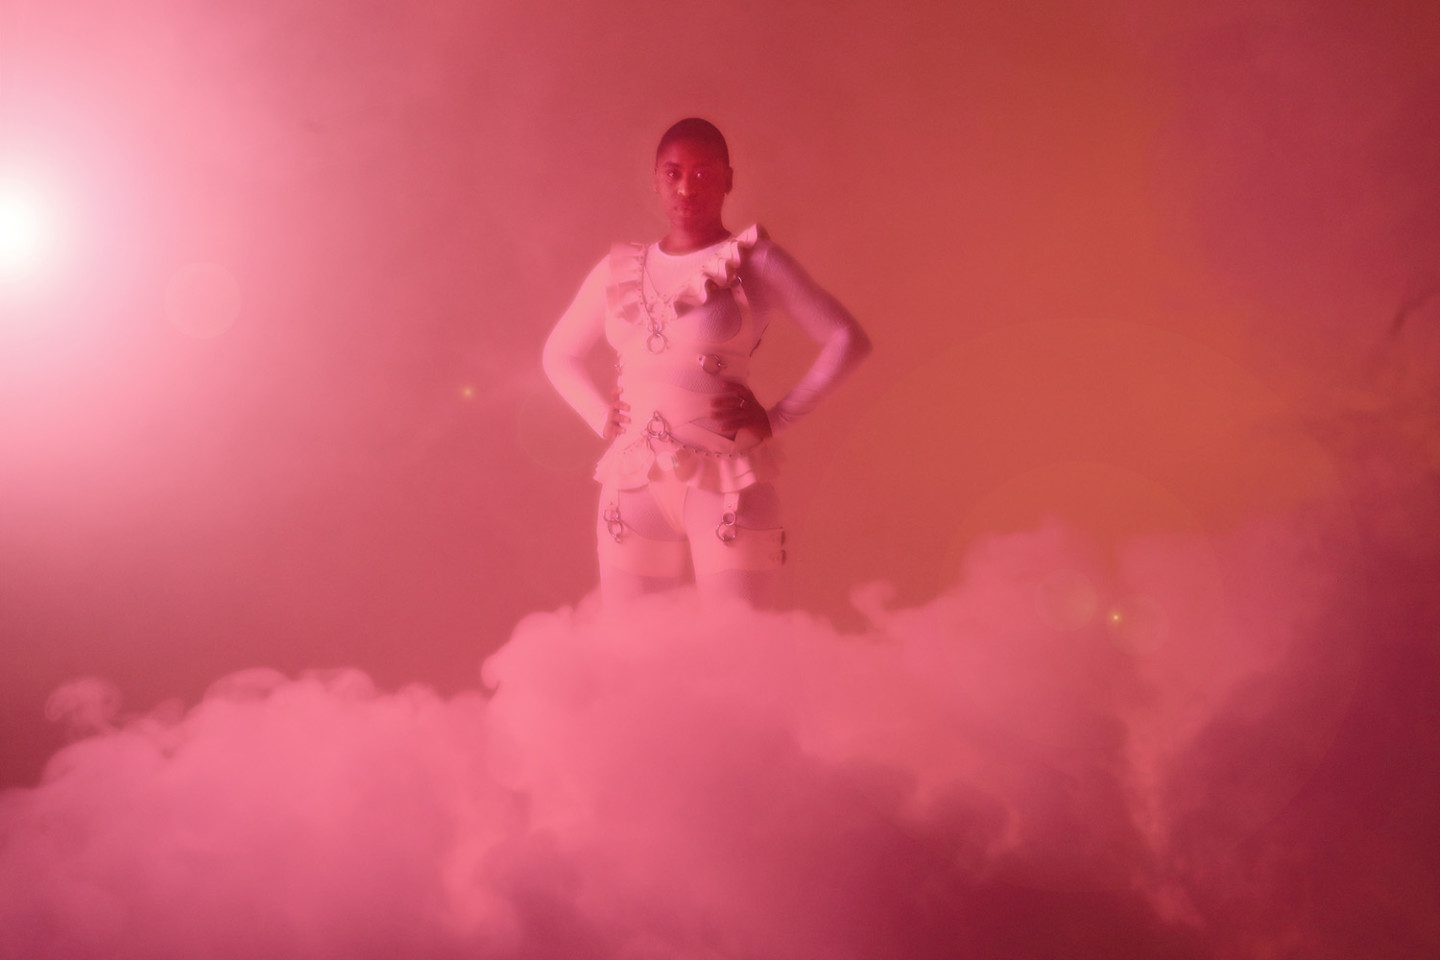 Film still from Bodily Remains, a person standing in a pink cloud